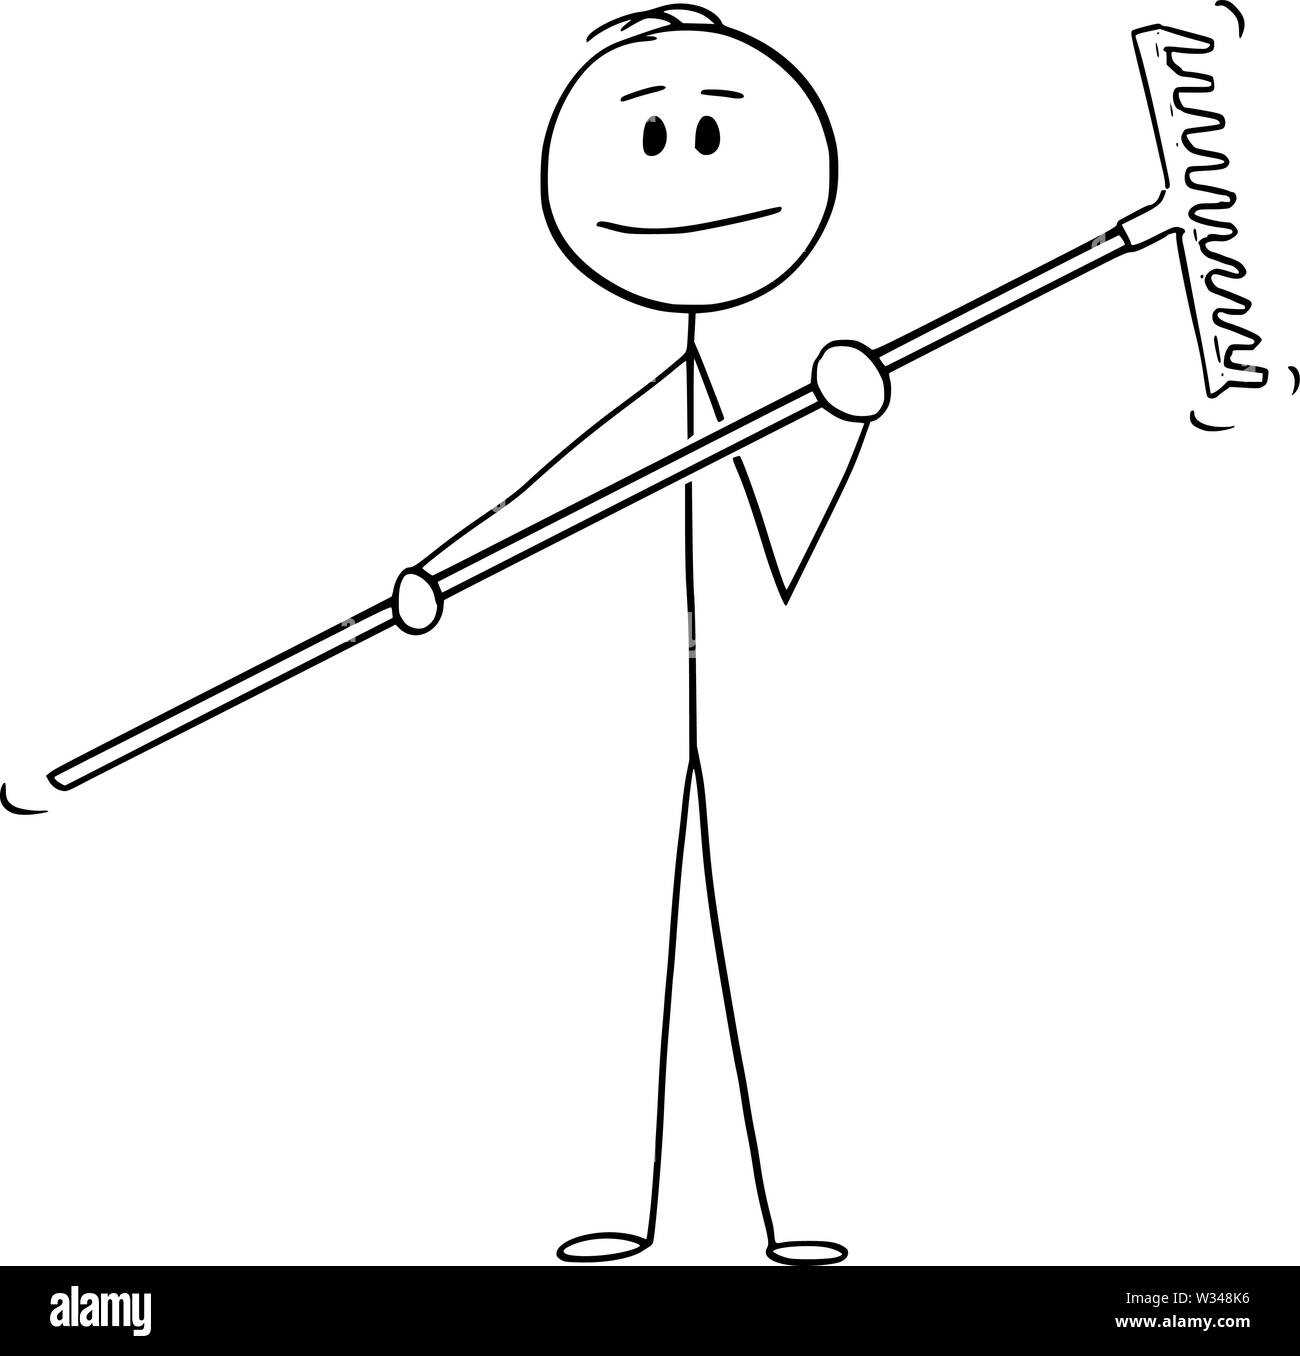 Cartoon Stick Figure Drawing Conceptual Illustration Of Naked Man The Best Porn Website 